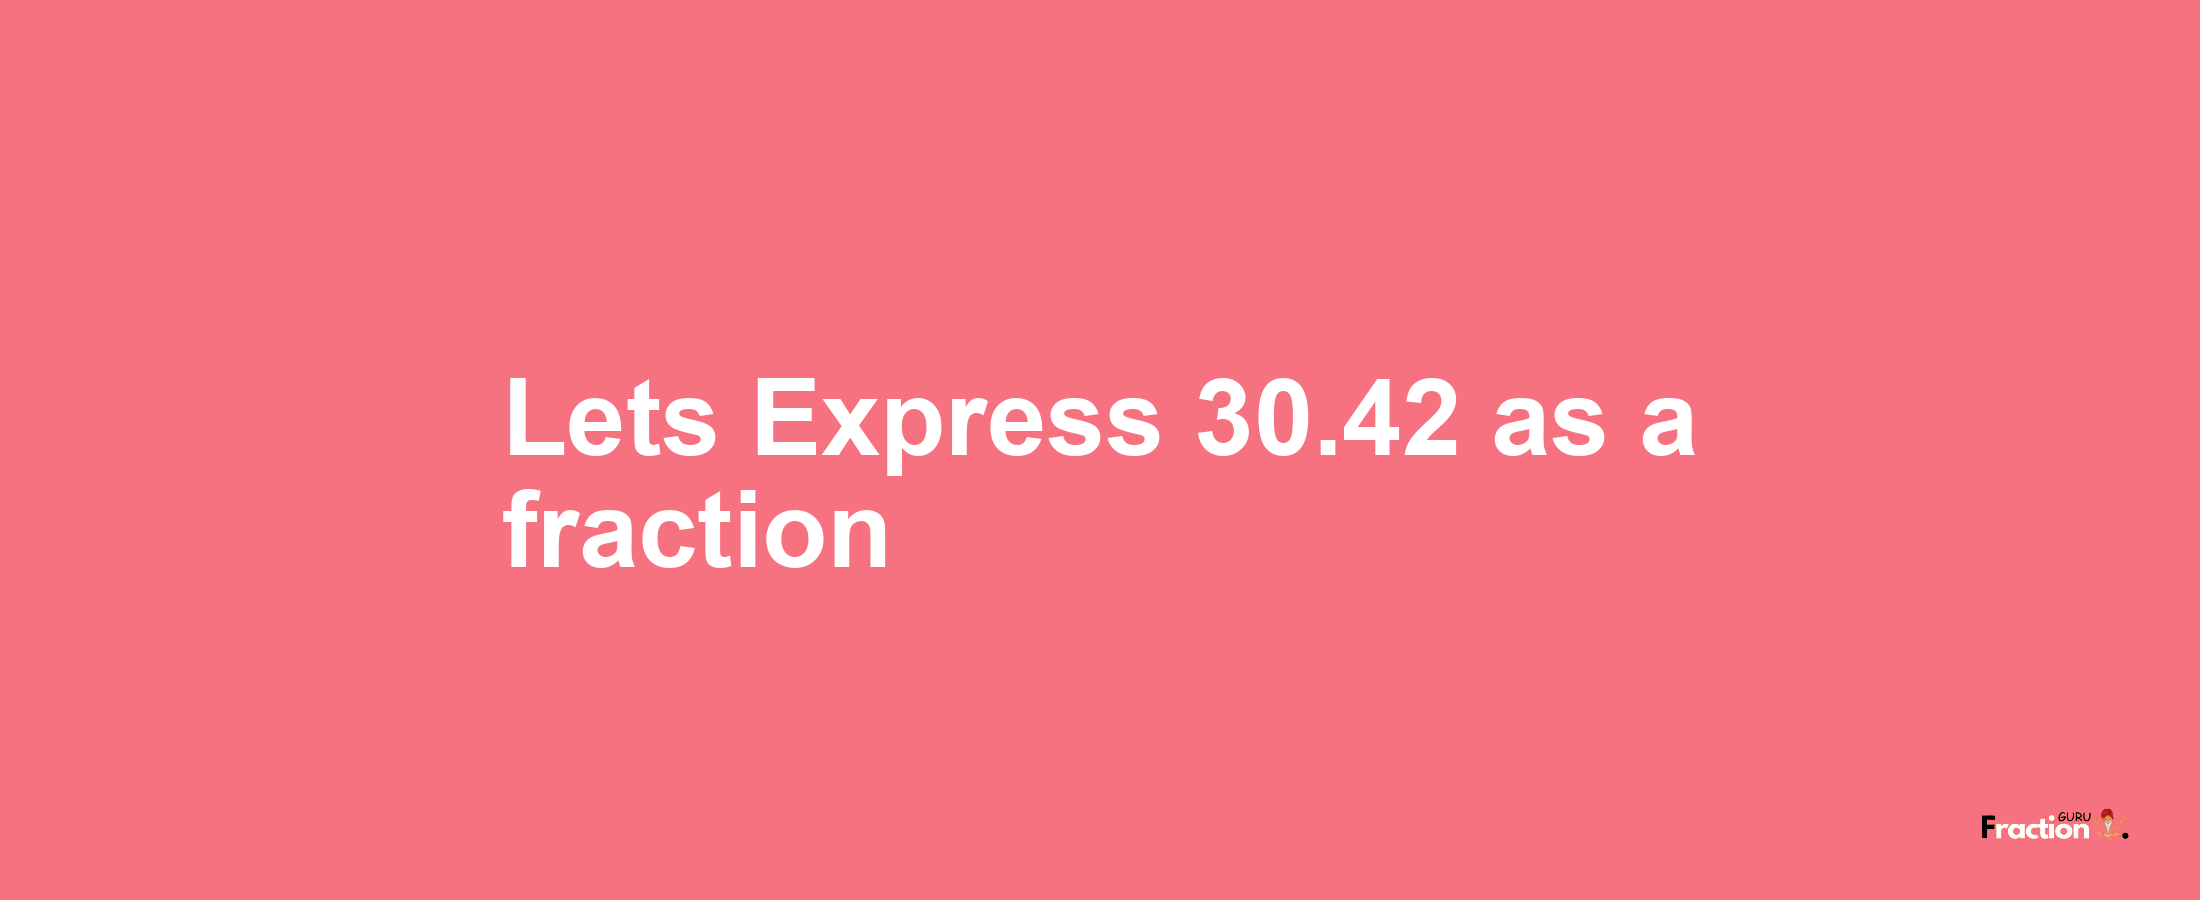 Lets Express 30.42 as afraction